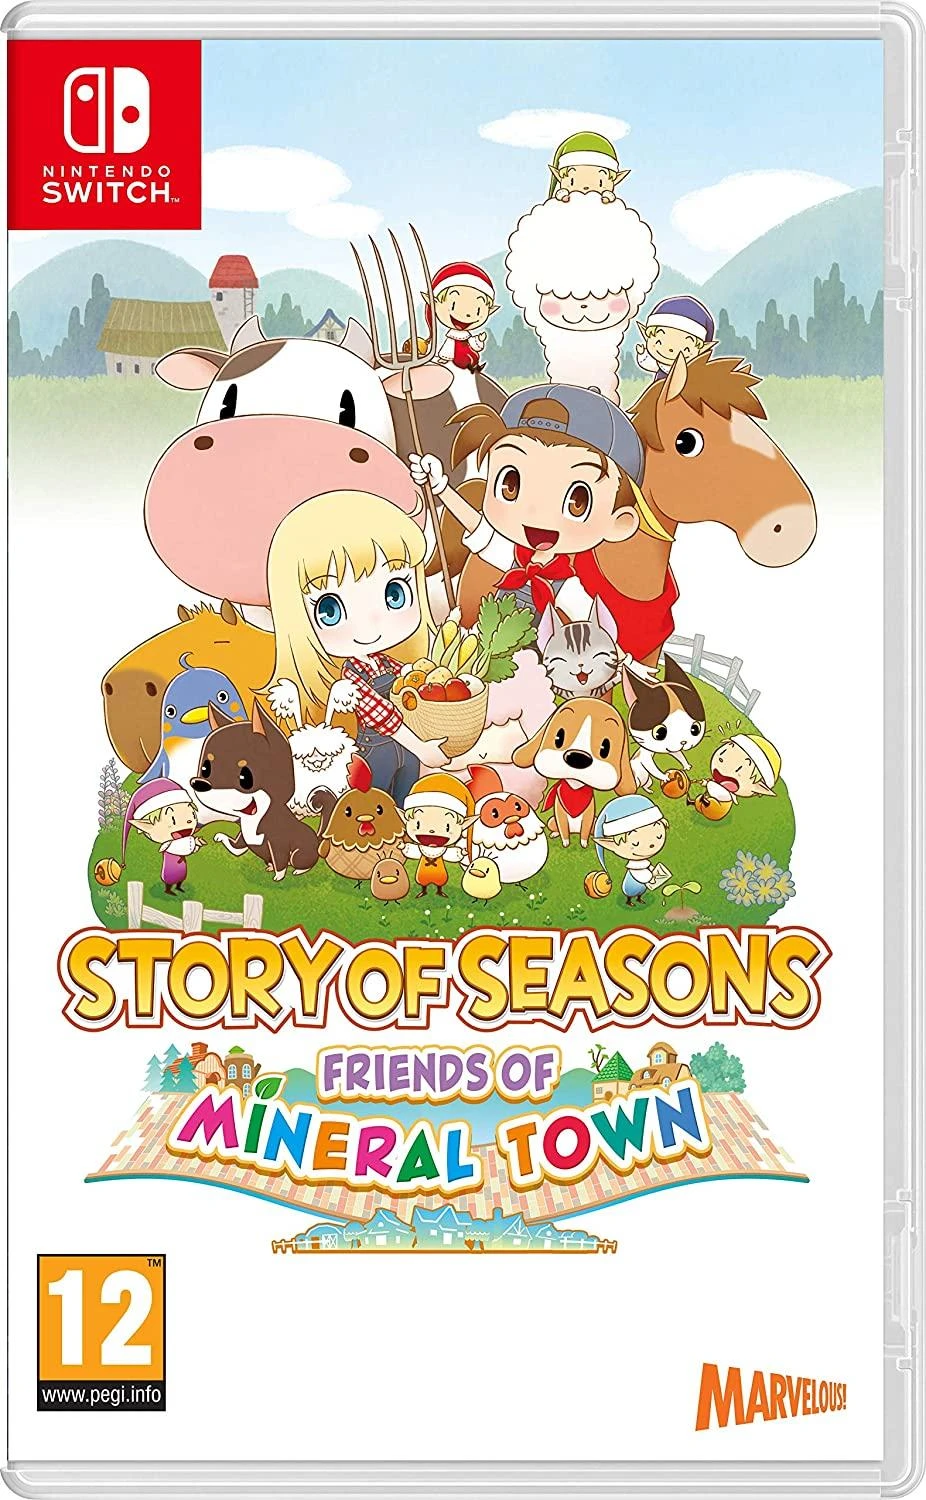 Story Of Seasons: Friends Mineral Town games Nintendo Switch strategy age 12 +|Game Deals| - AliExpress